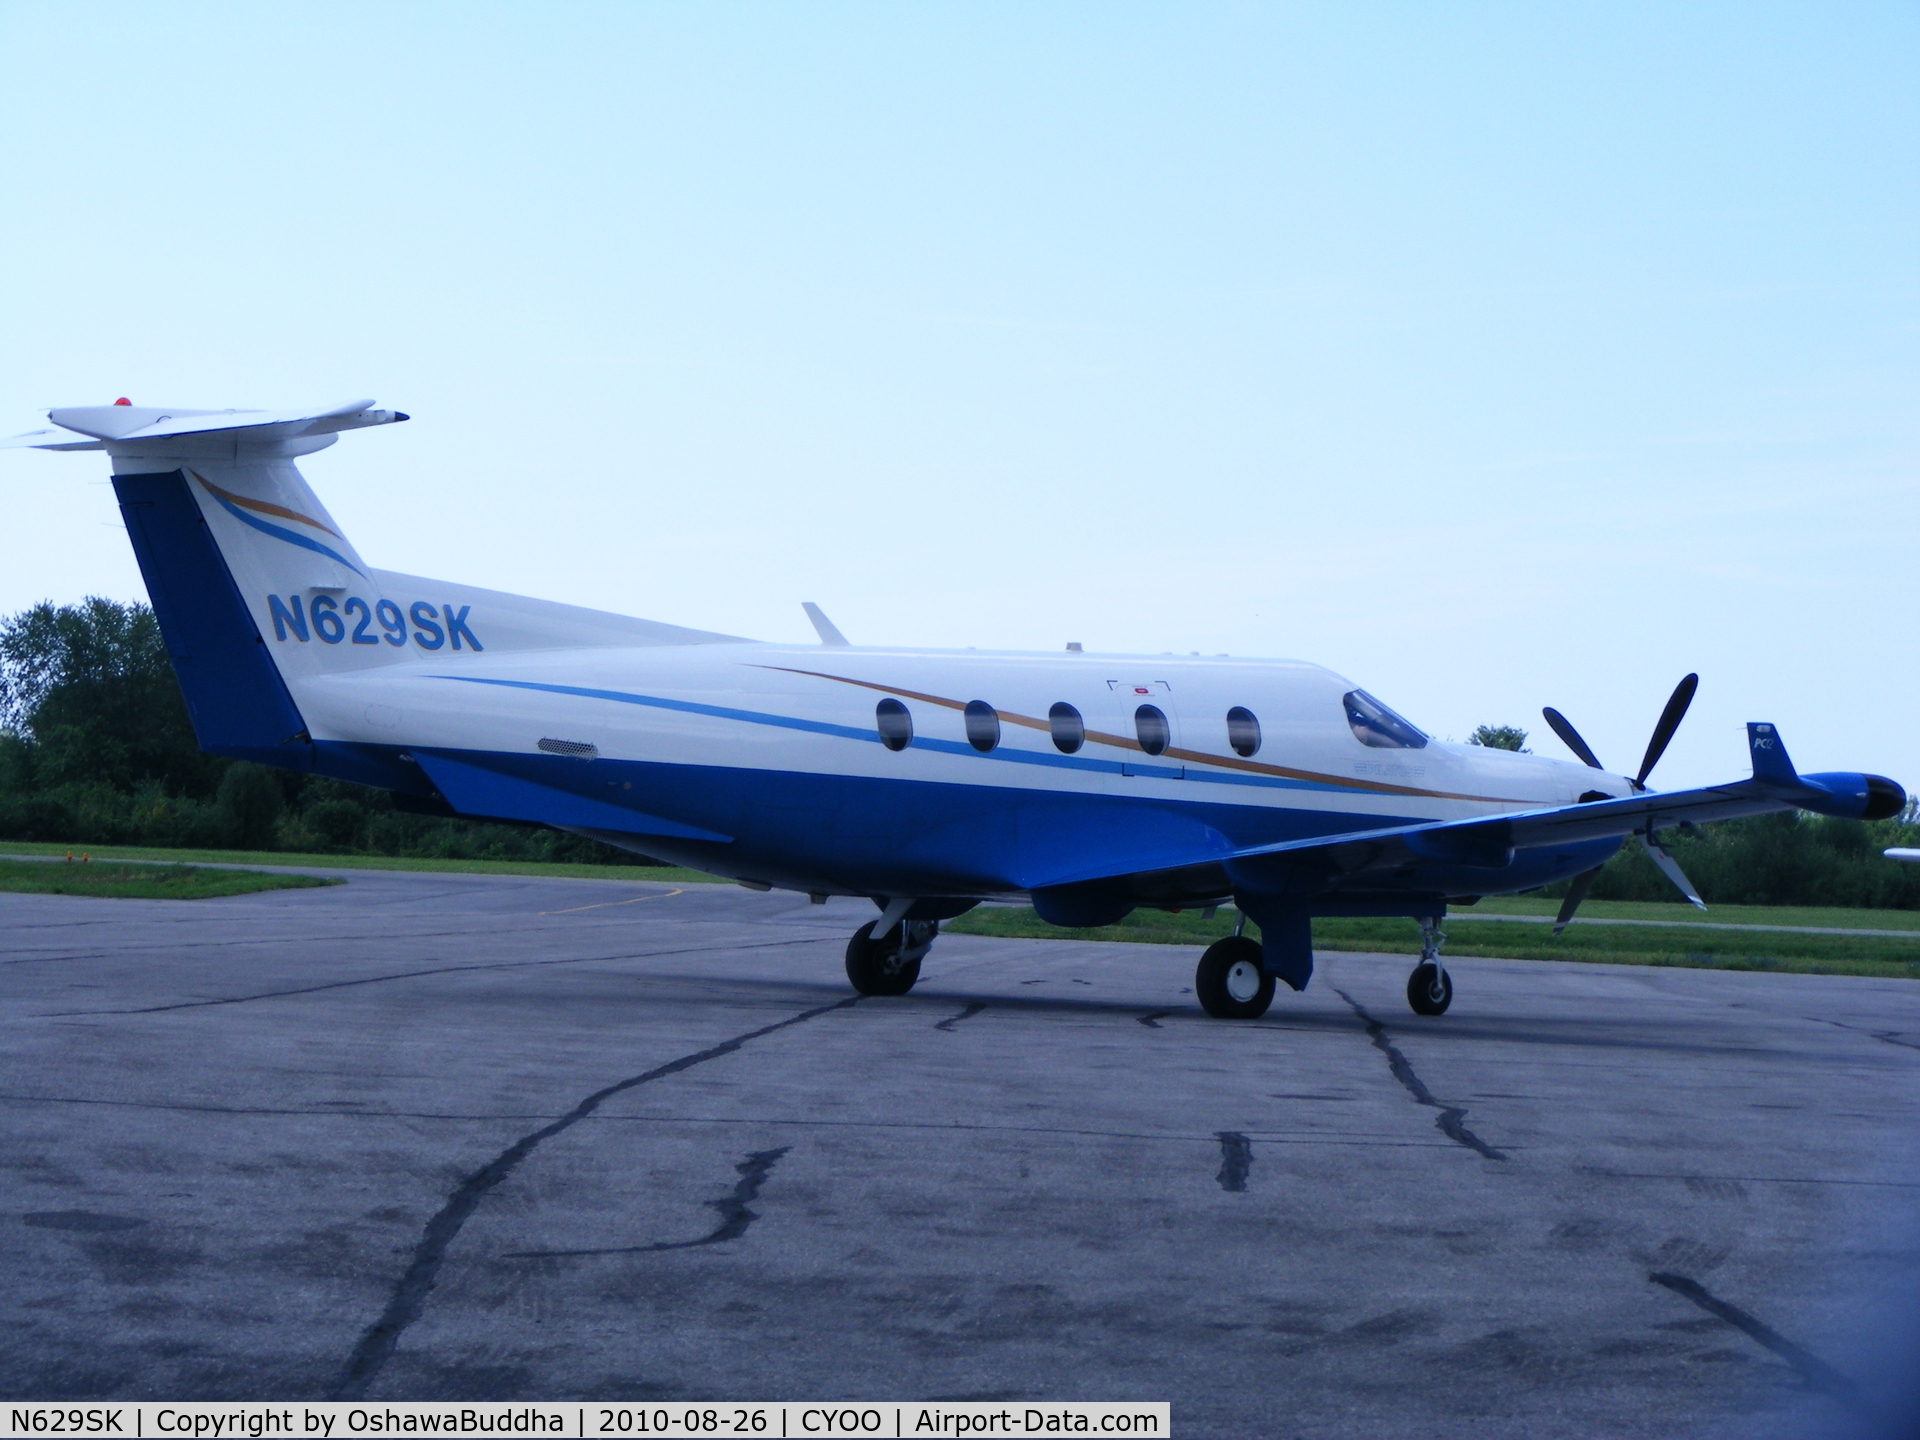 N629SK, 2001 Pilatus PC-12/45 C/N 413, Been trying to get this one for almost a month now....